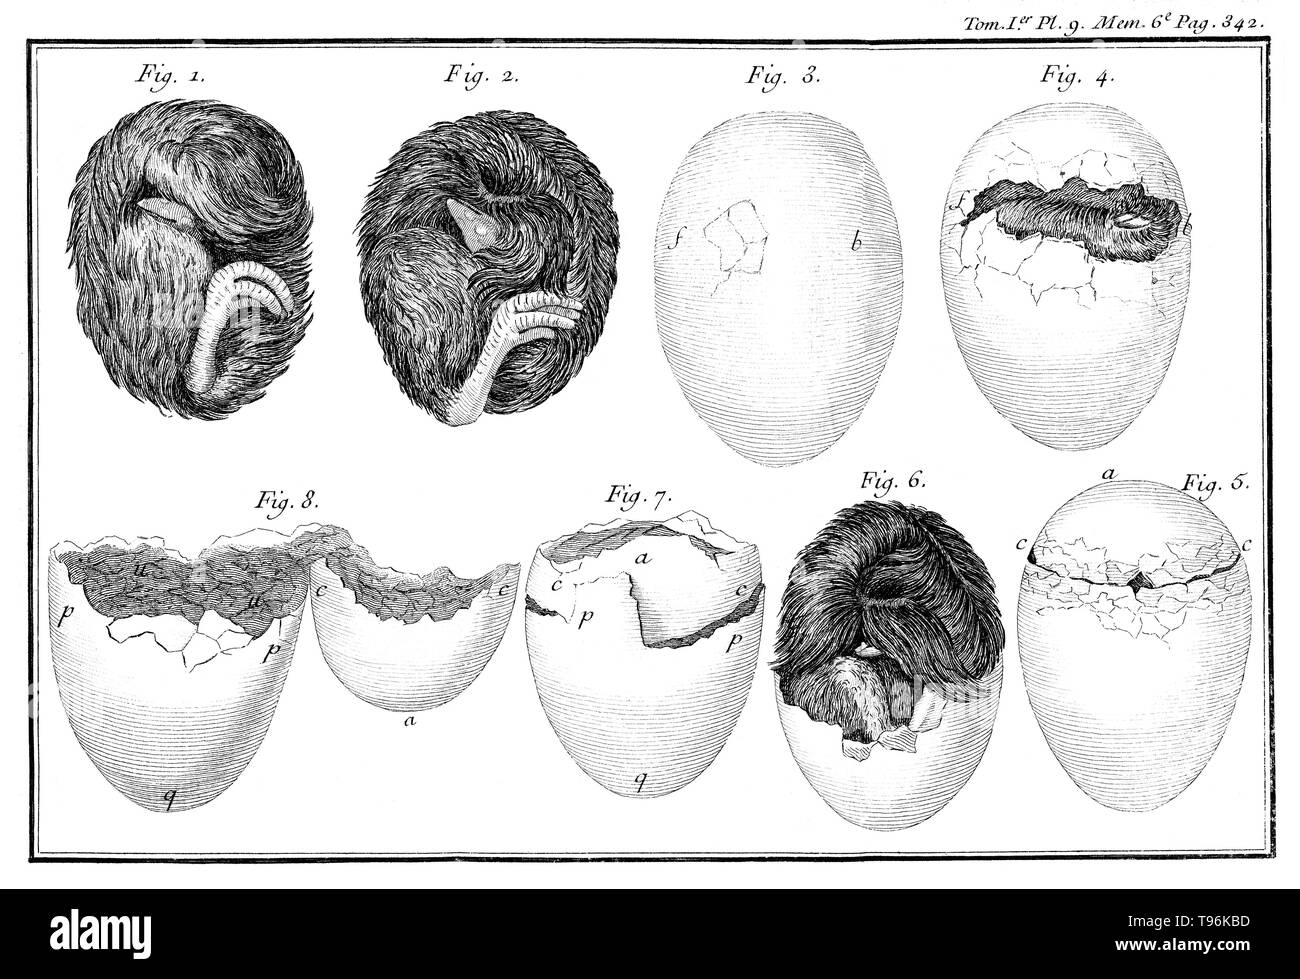 Poultry egg hatching process. Plate 9, page 342. René Antoine Ferchault de Réaumur (February 28, 1683 - October 17, 1757) was a French scientist who contributed to many different fields, especially the study of insects. In 1699 he studied civil law and mathematics. In 1703 he went to Paris, where he continued the study of mathematics and physics, and in 1708 was elected, at the age of 24, a member of the Académie des Sciences. Stock Photo